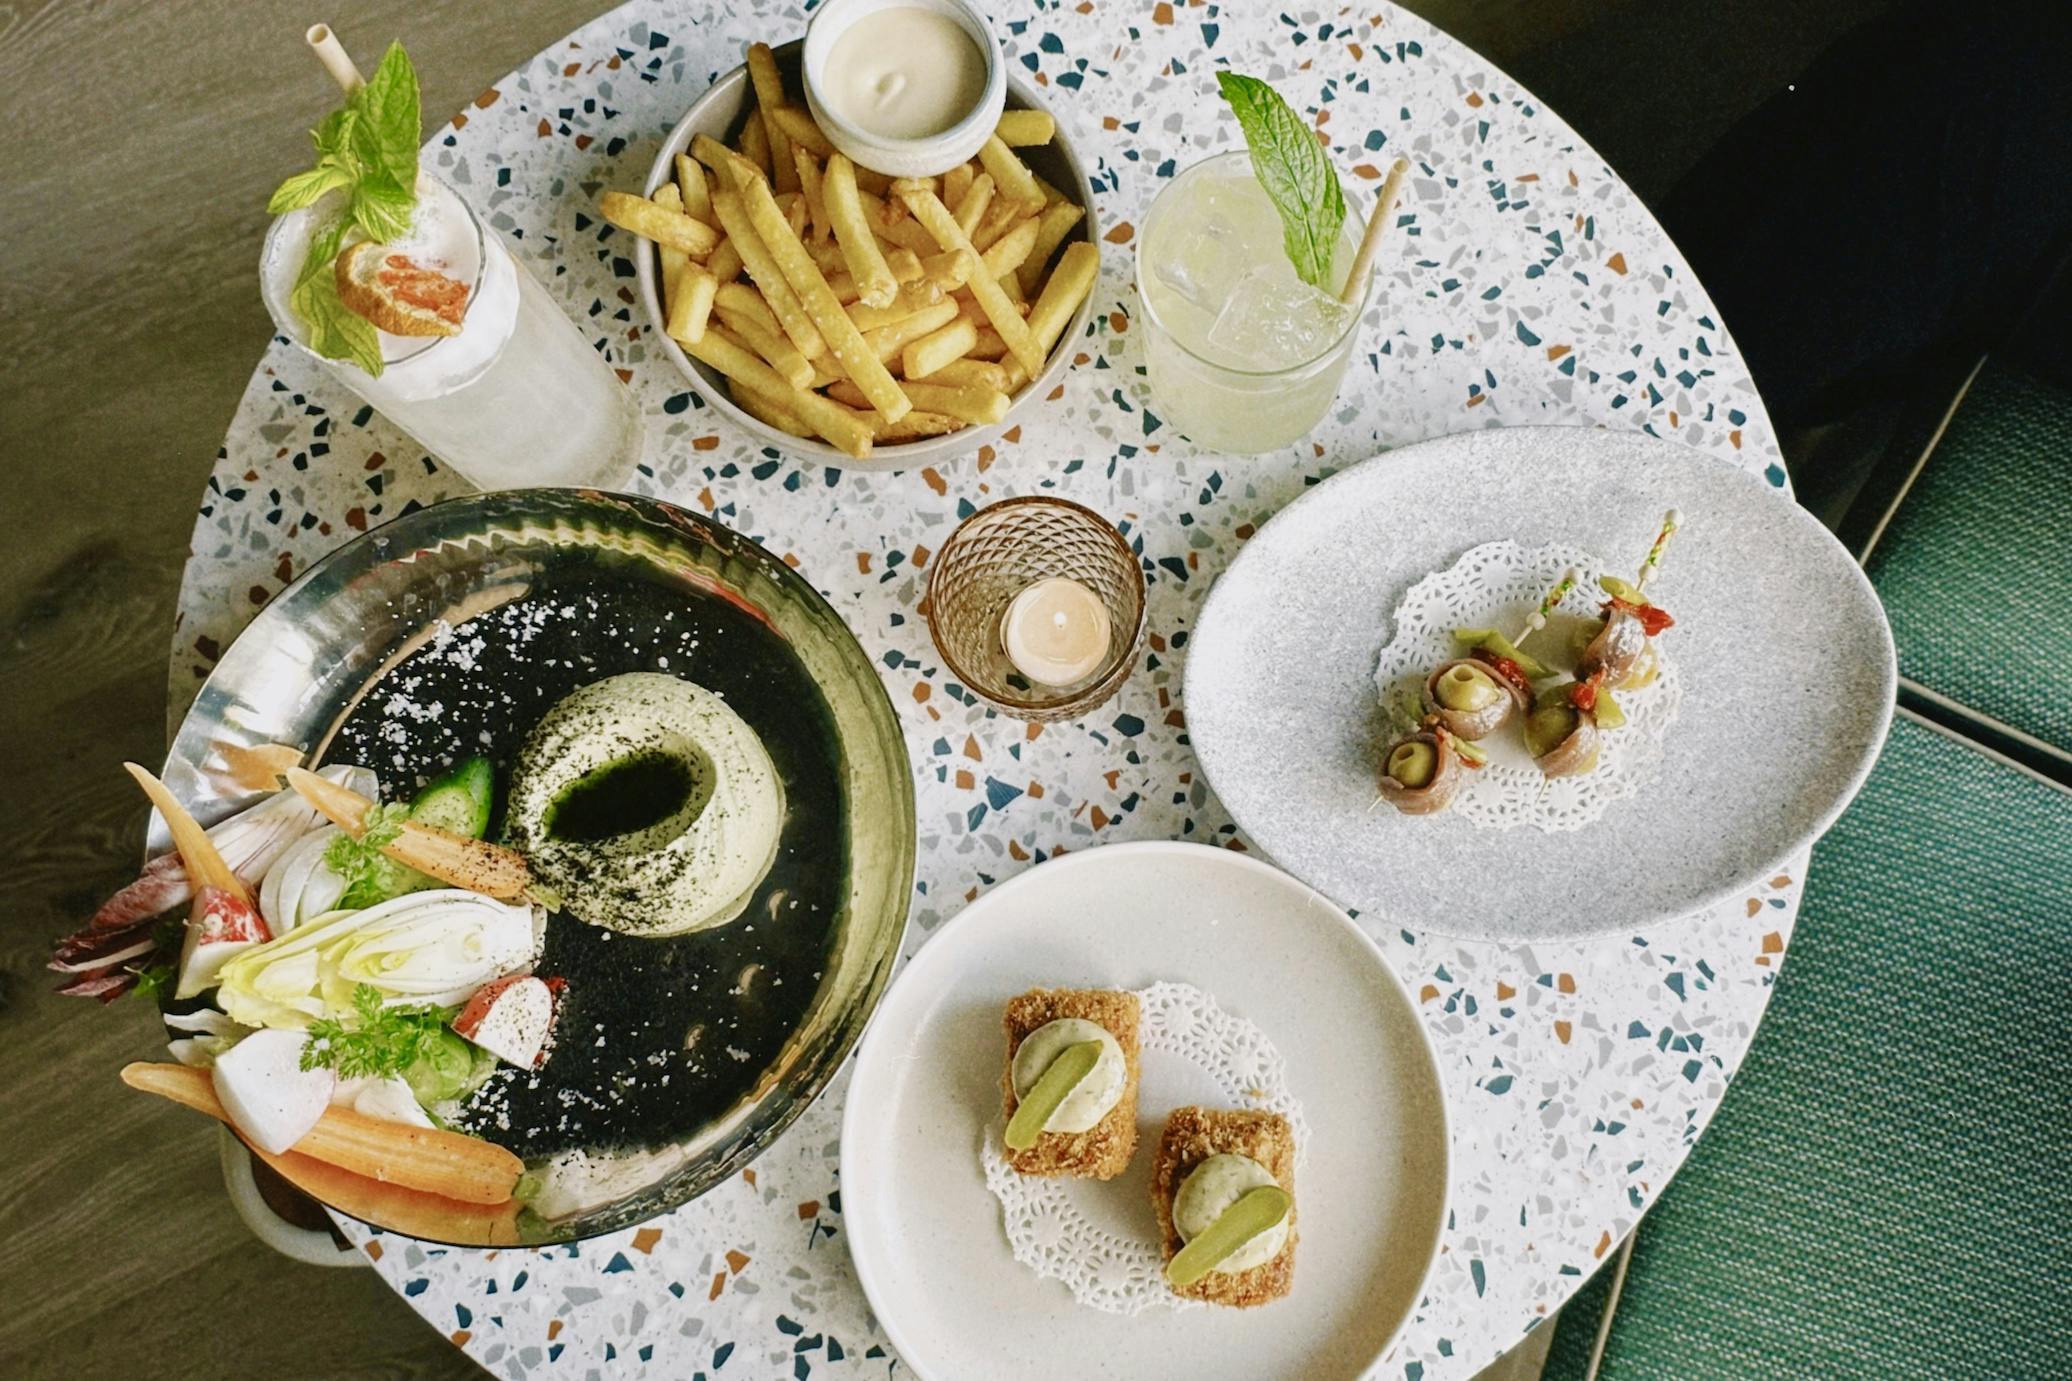 11 Of The Best Restaurants To Try In Victoria With Food That Gives